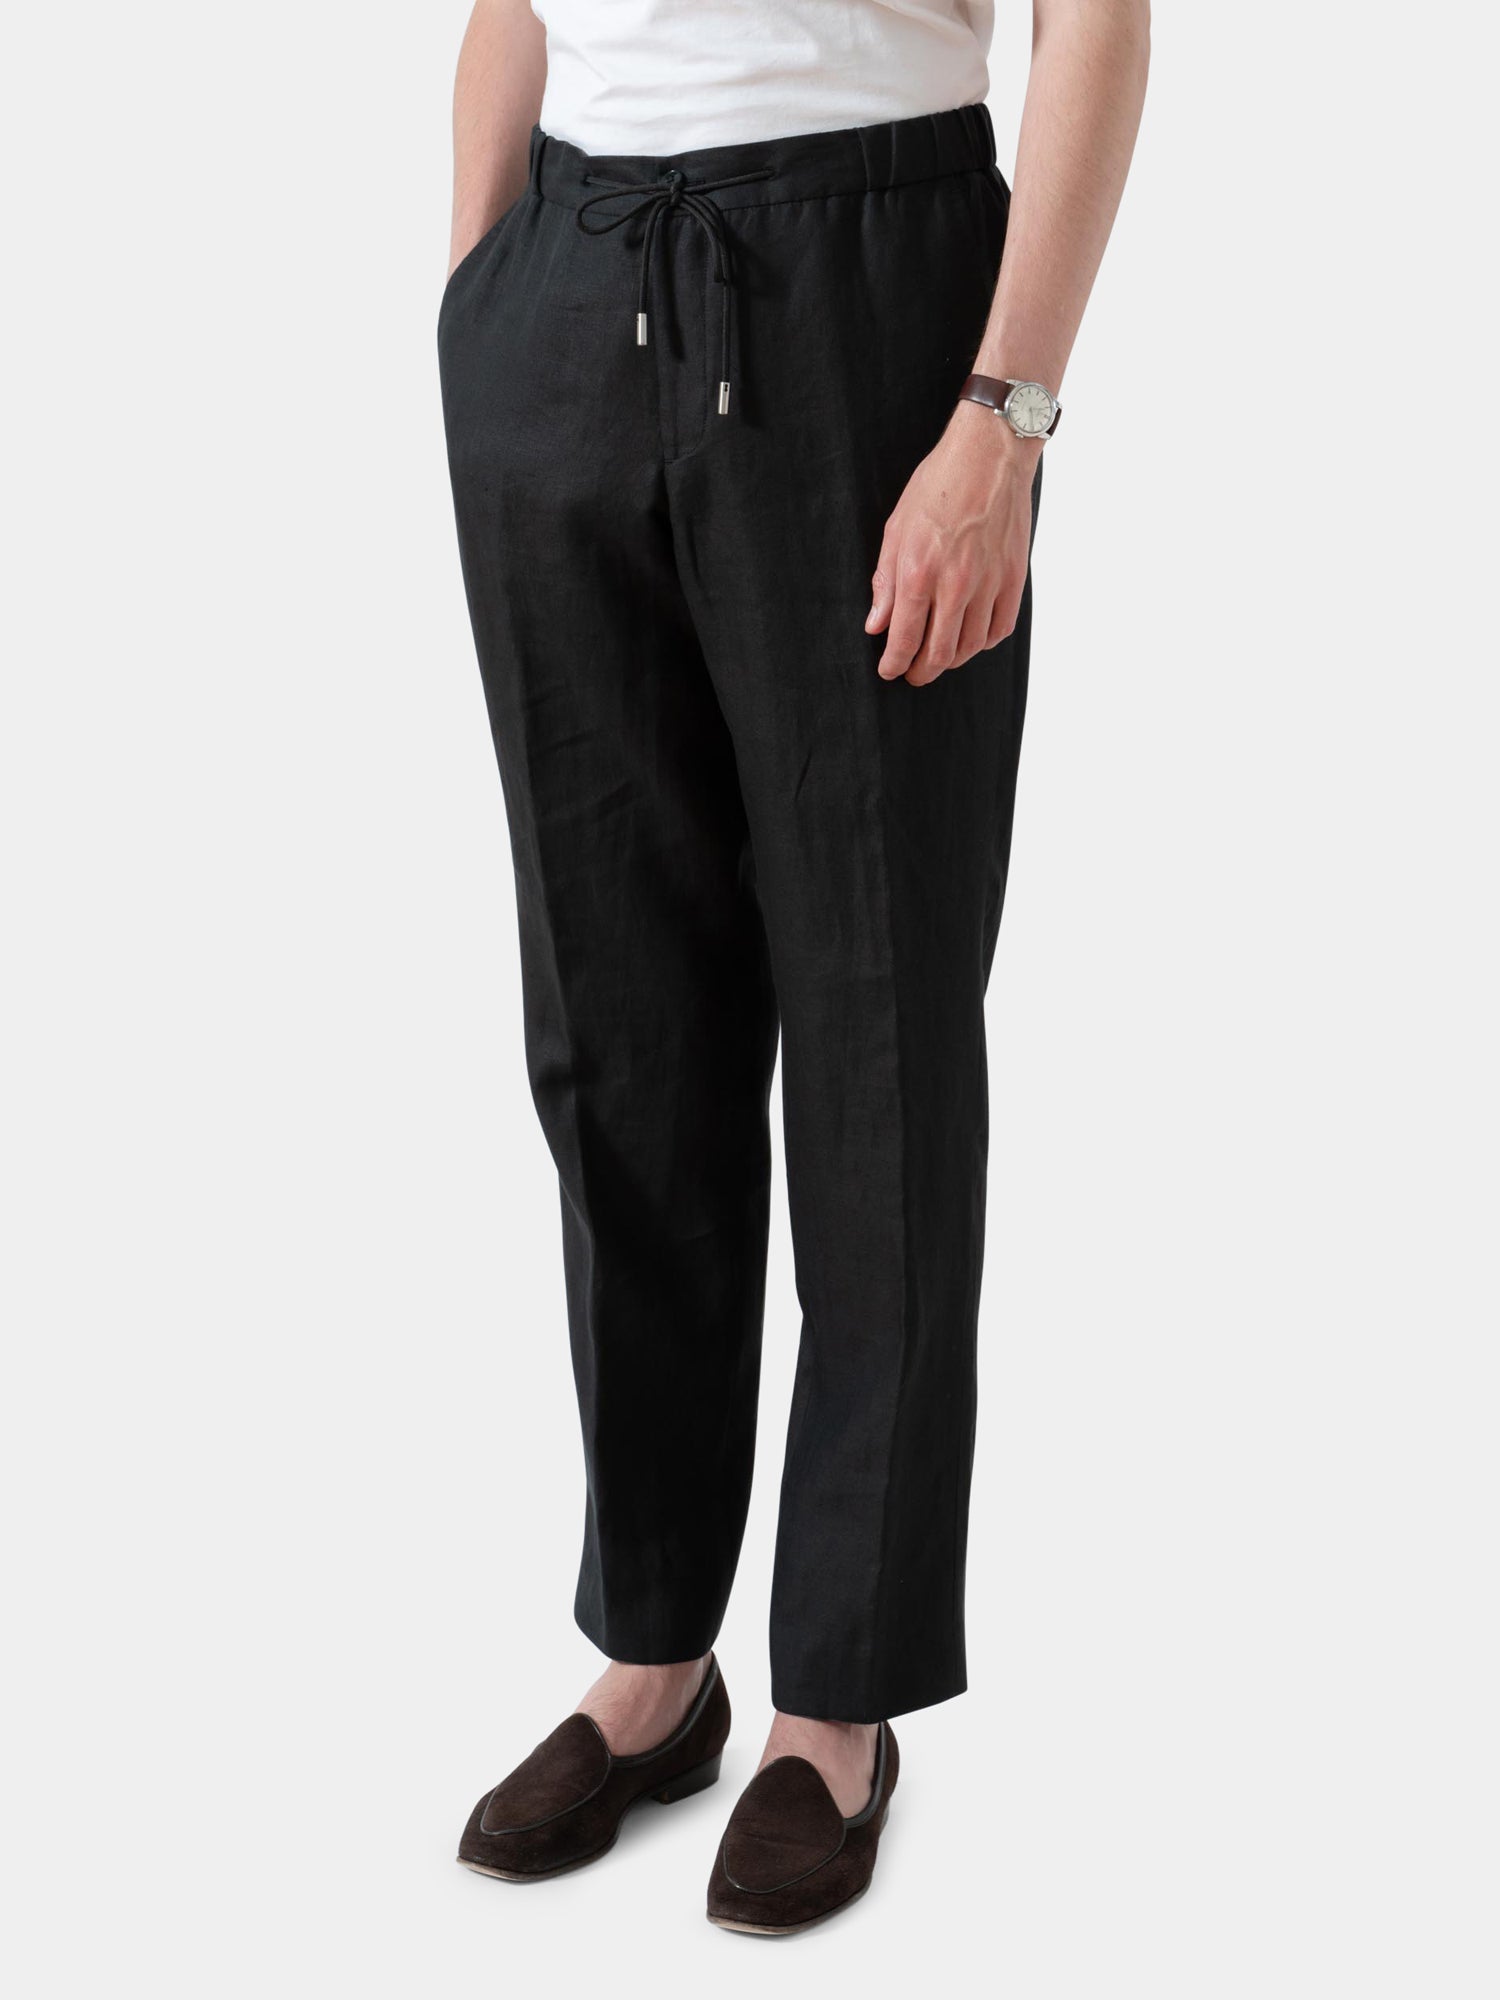 Abelino - Men's Black Trousers | 100% Linen Trousers for Men | Yell – Yell  - Unisexx Fashion House